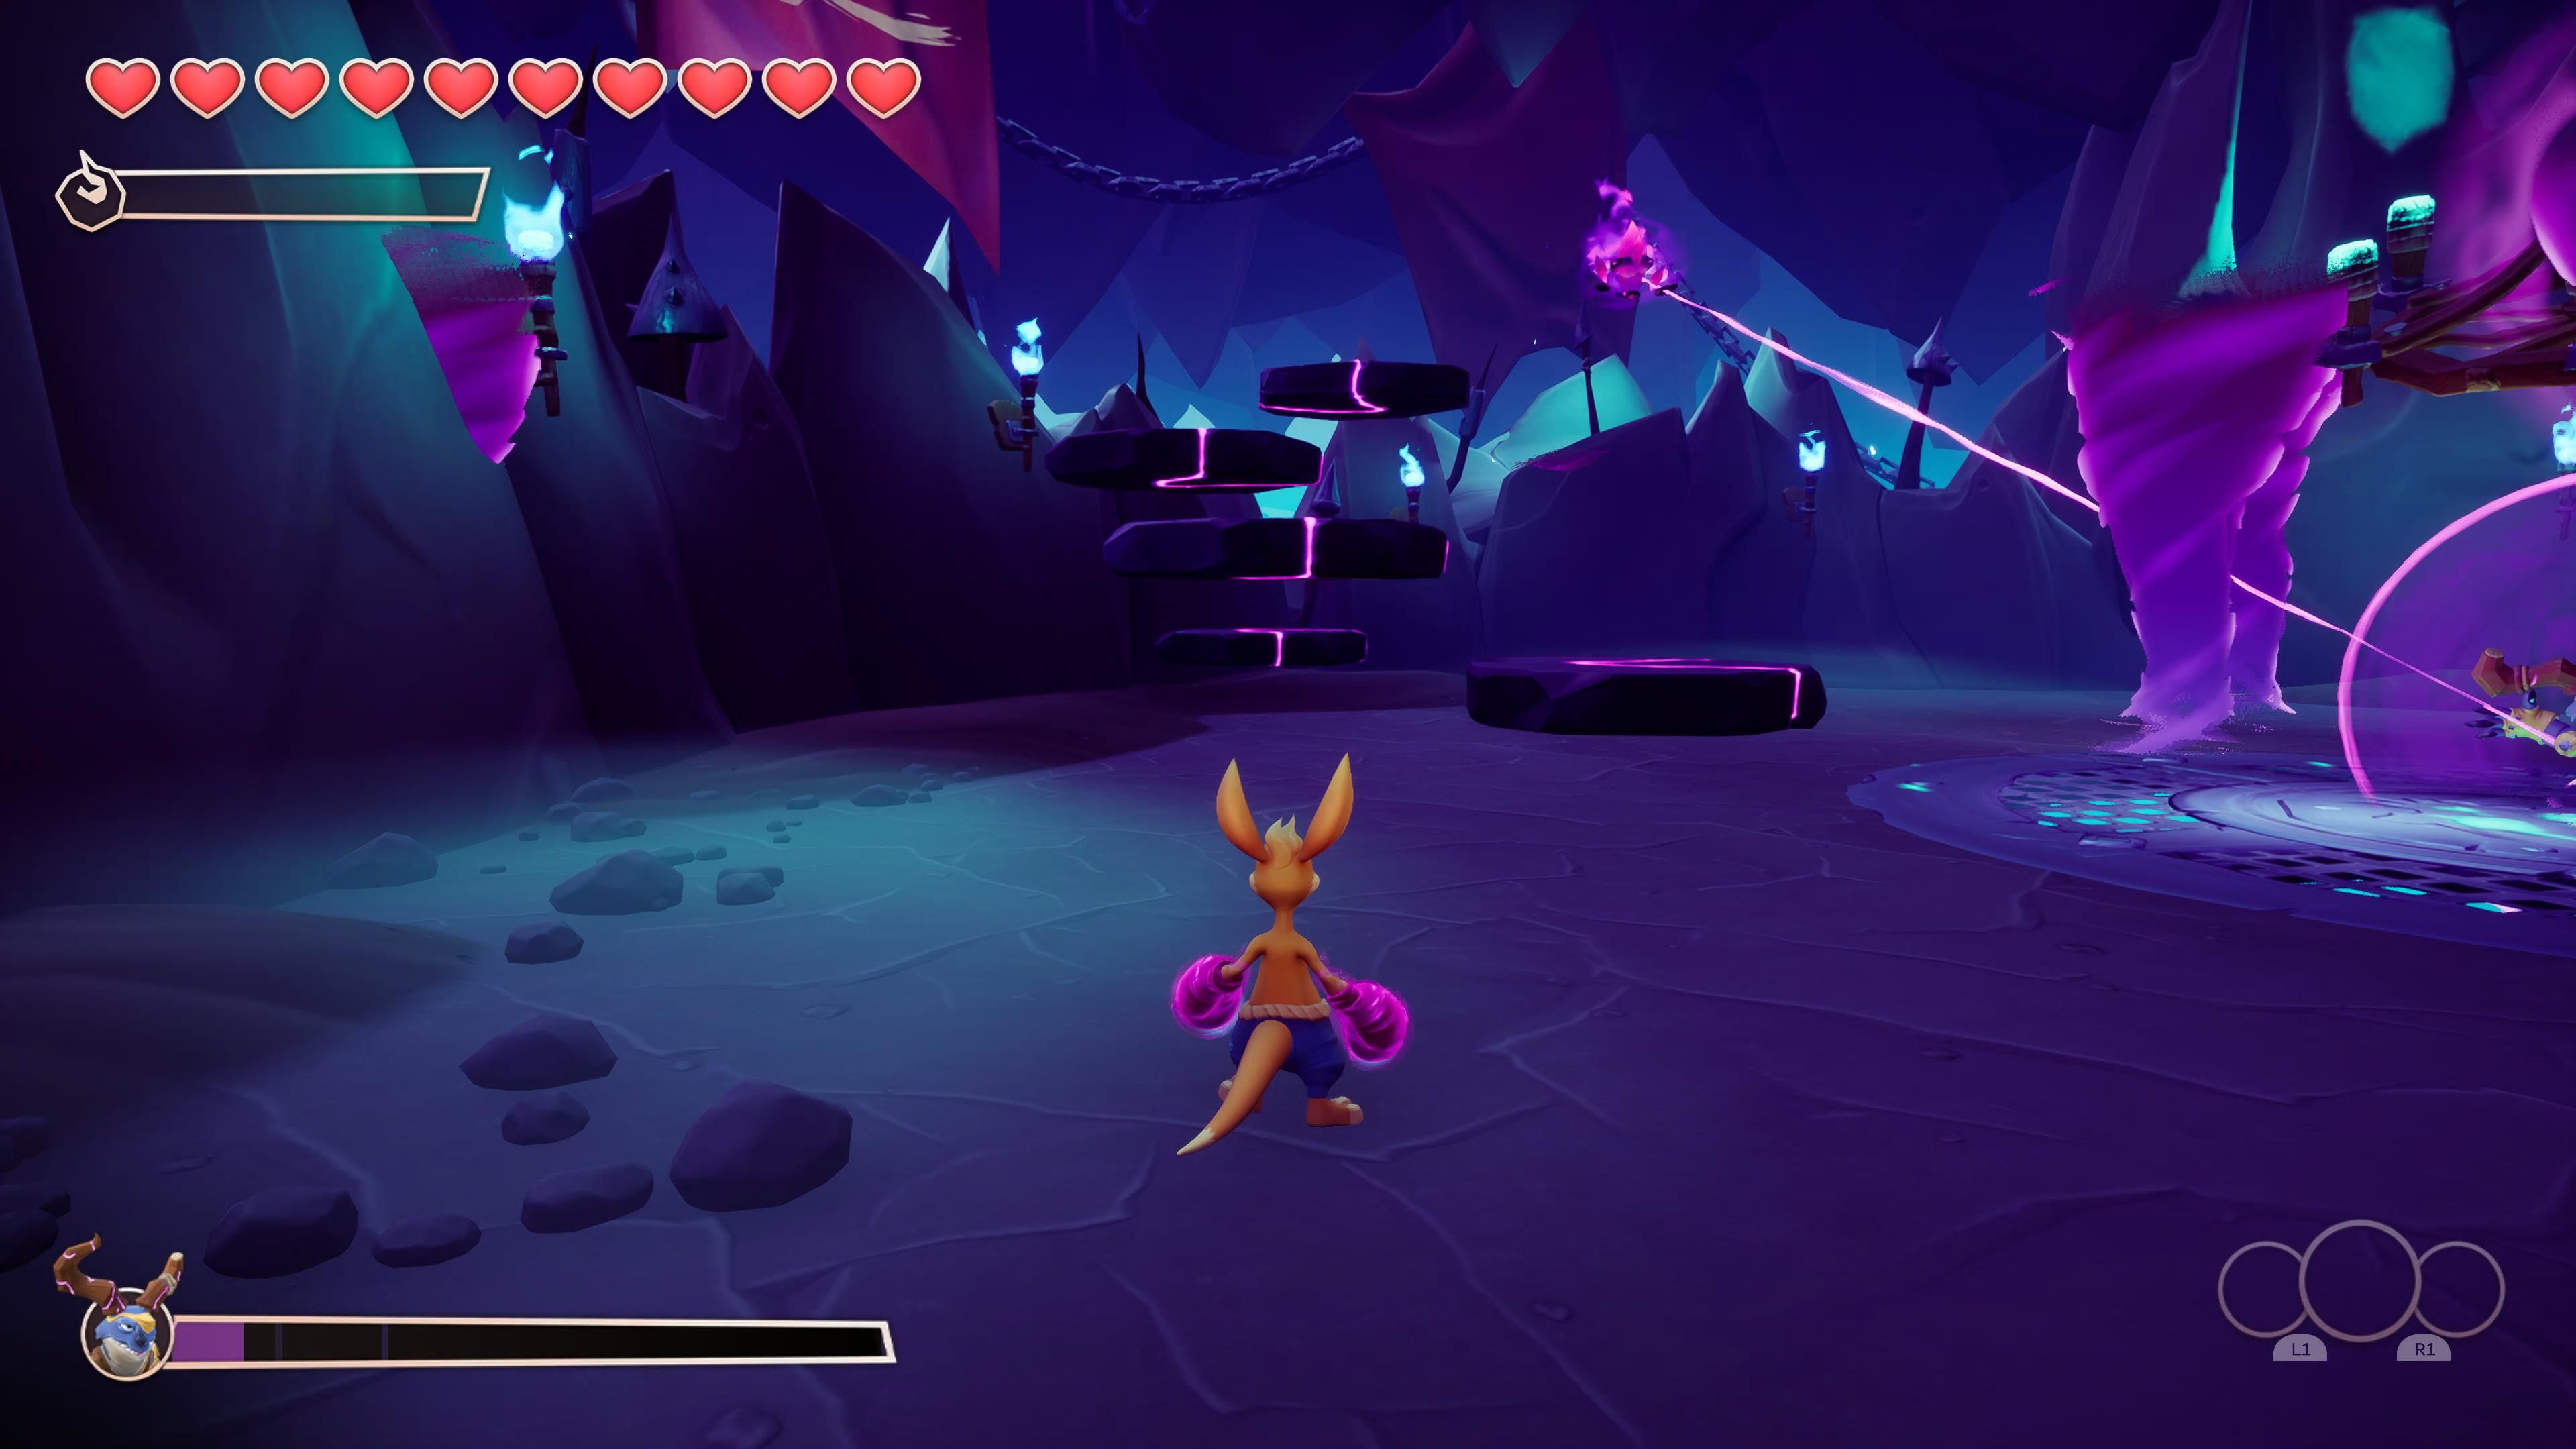 Platforming section in the third phase of The Terror fight